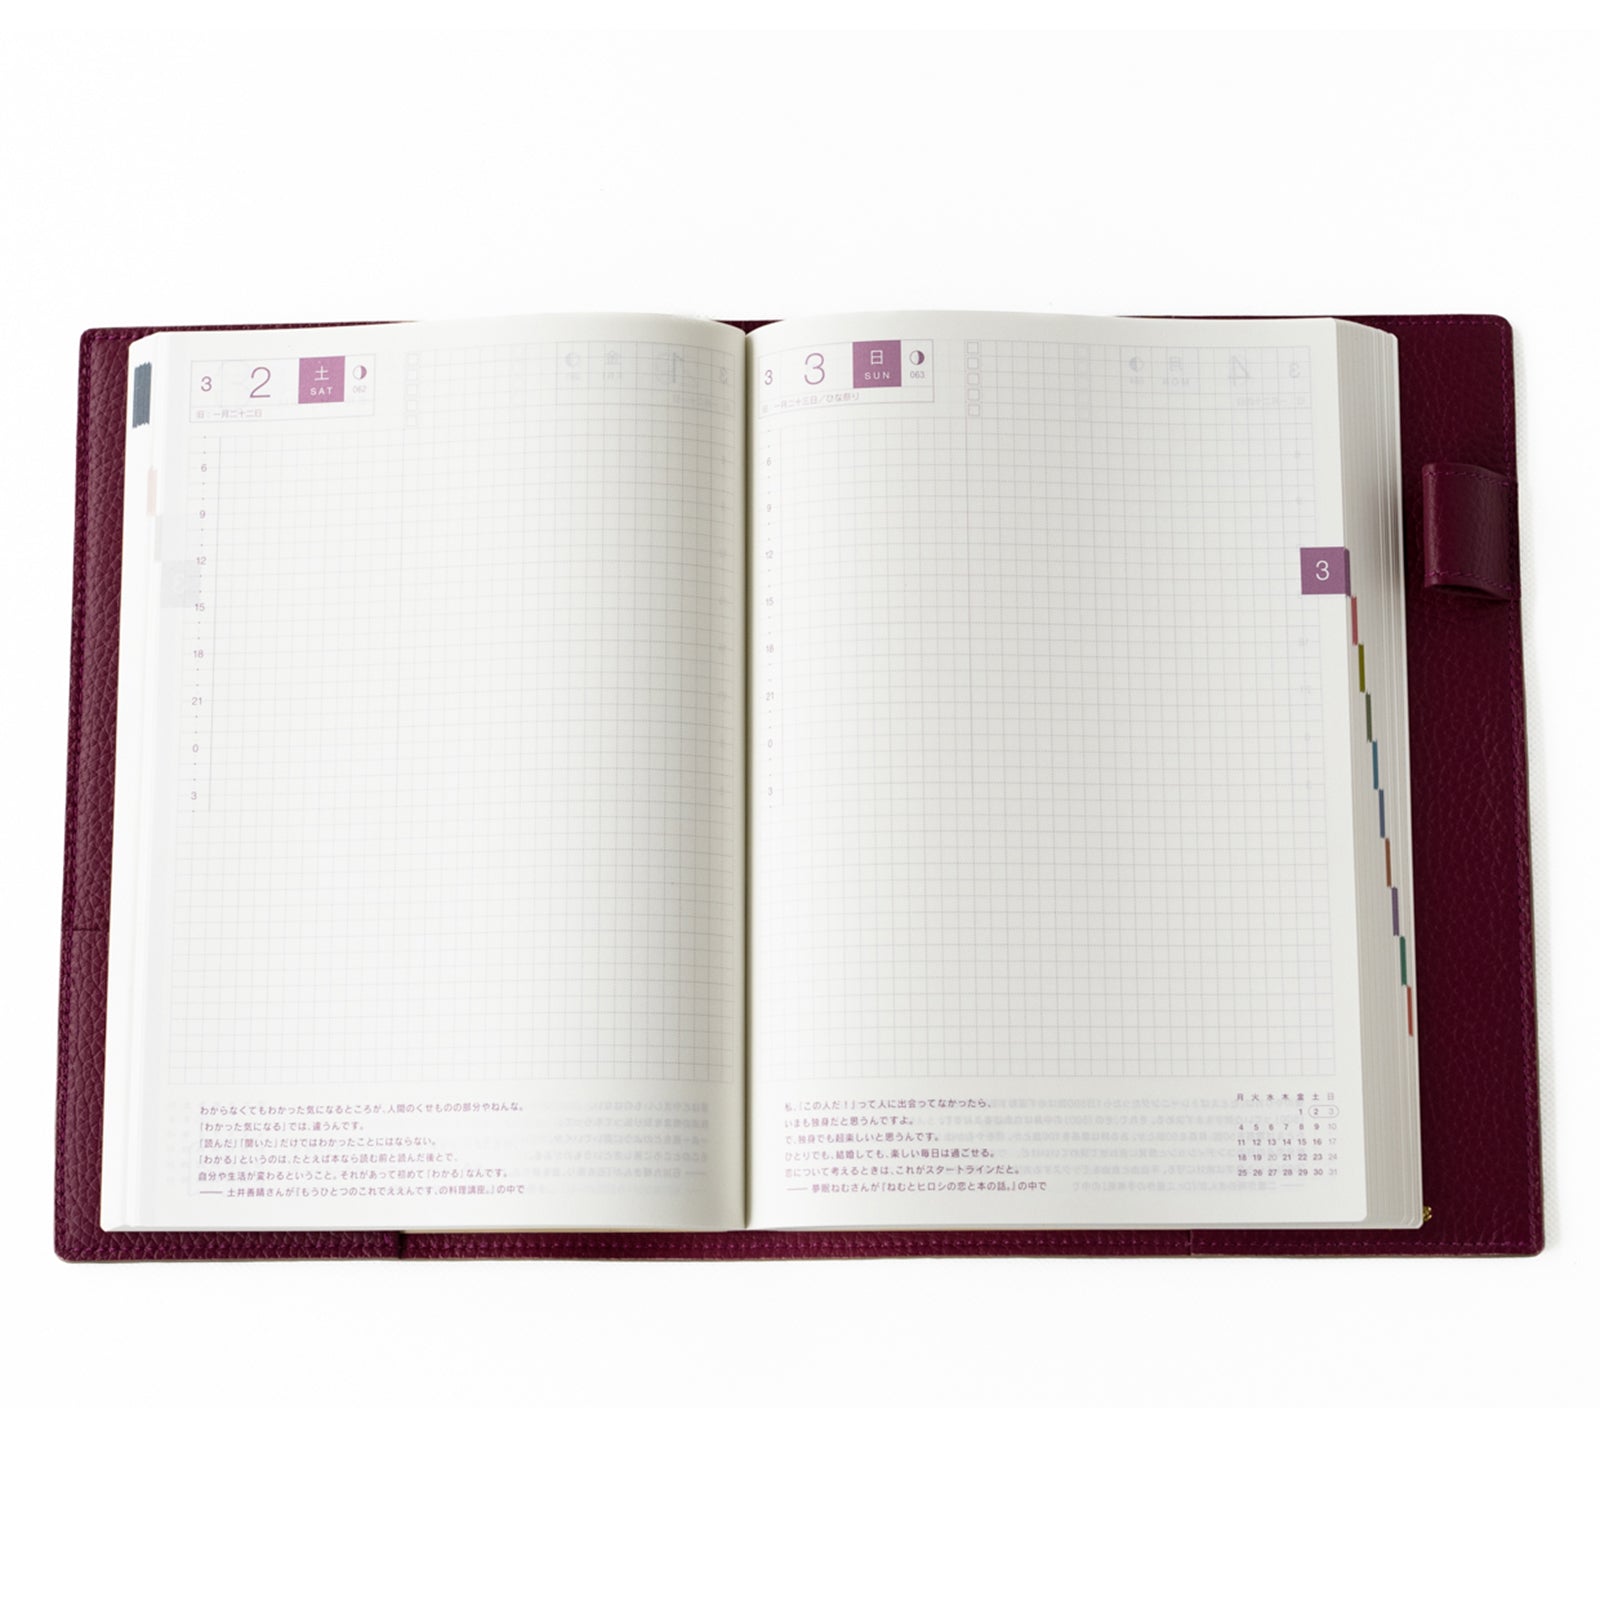 [Color order] A5 size notebook cover Taurillon Clemence x Cuir Mash 